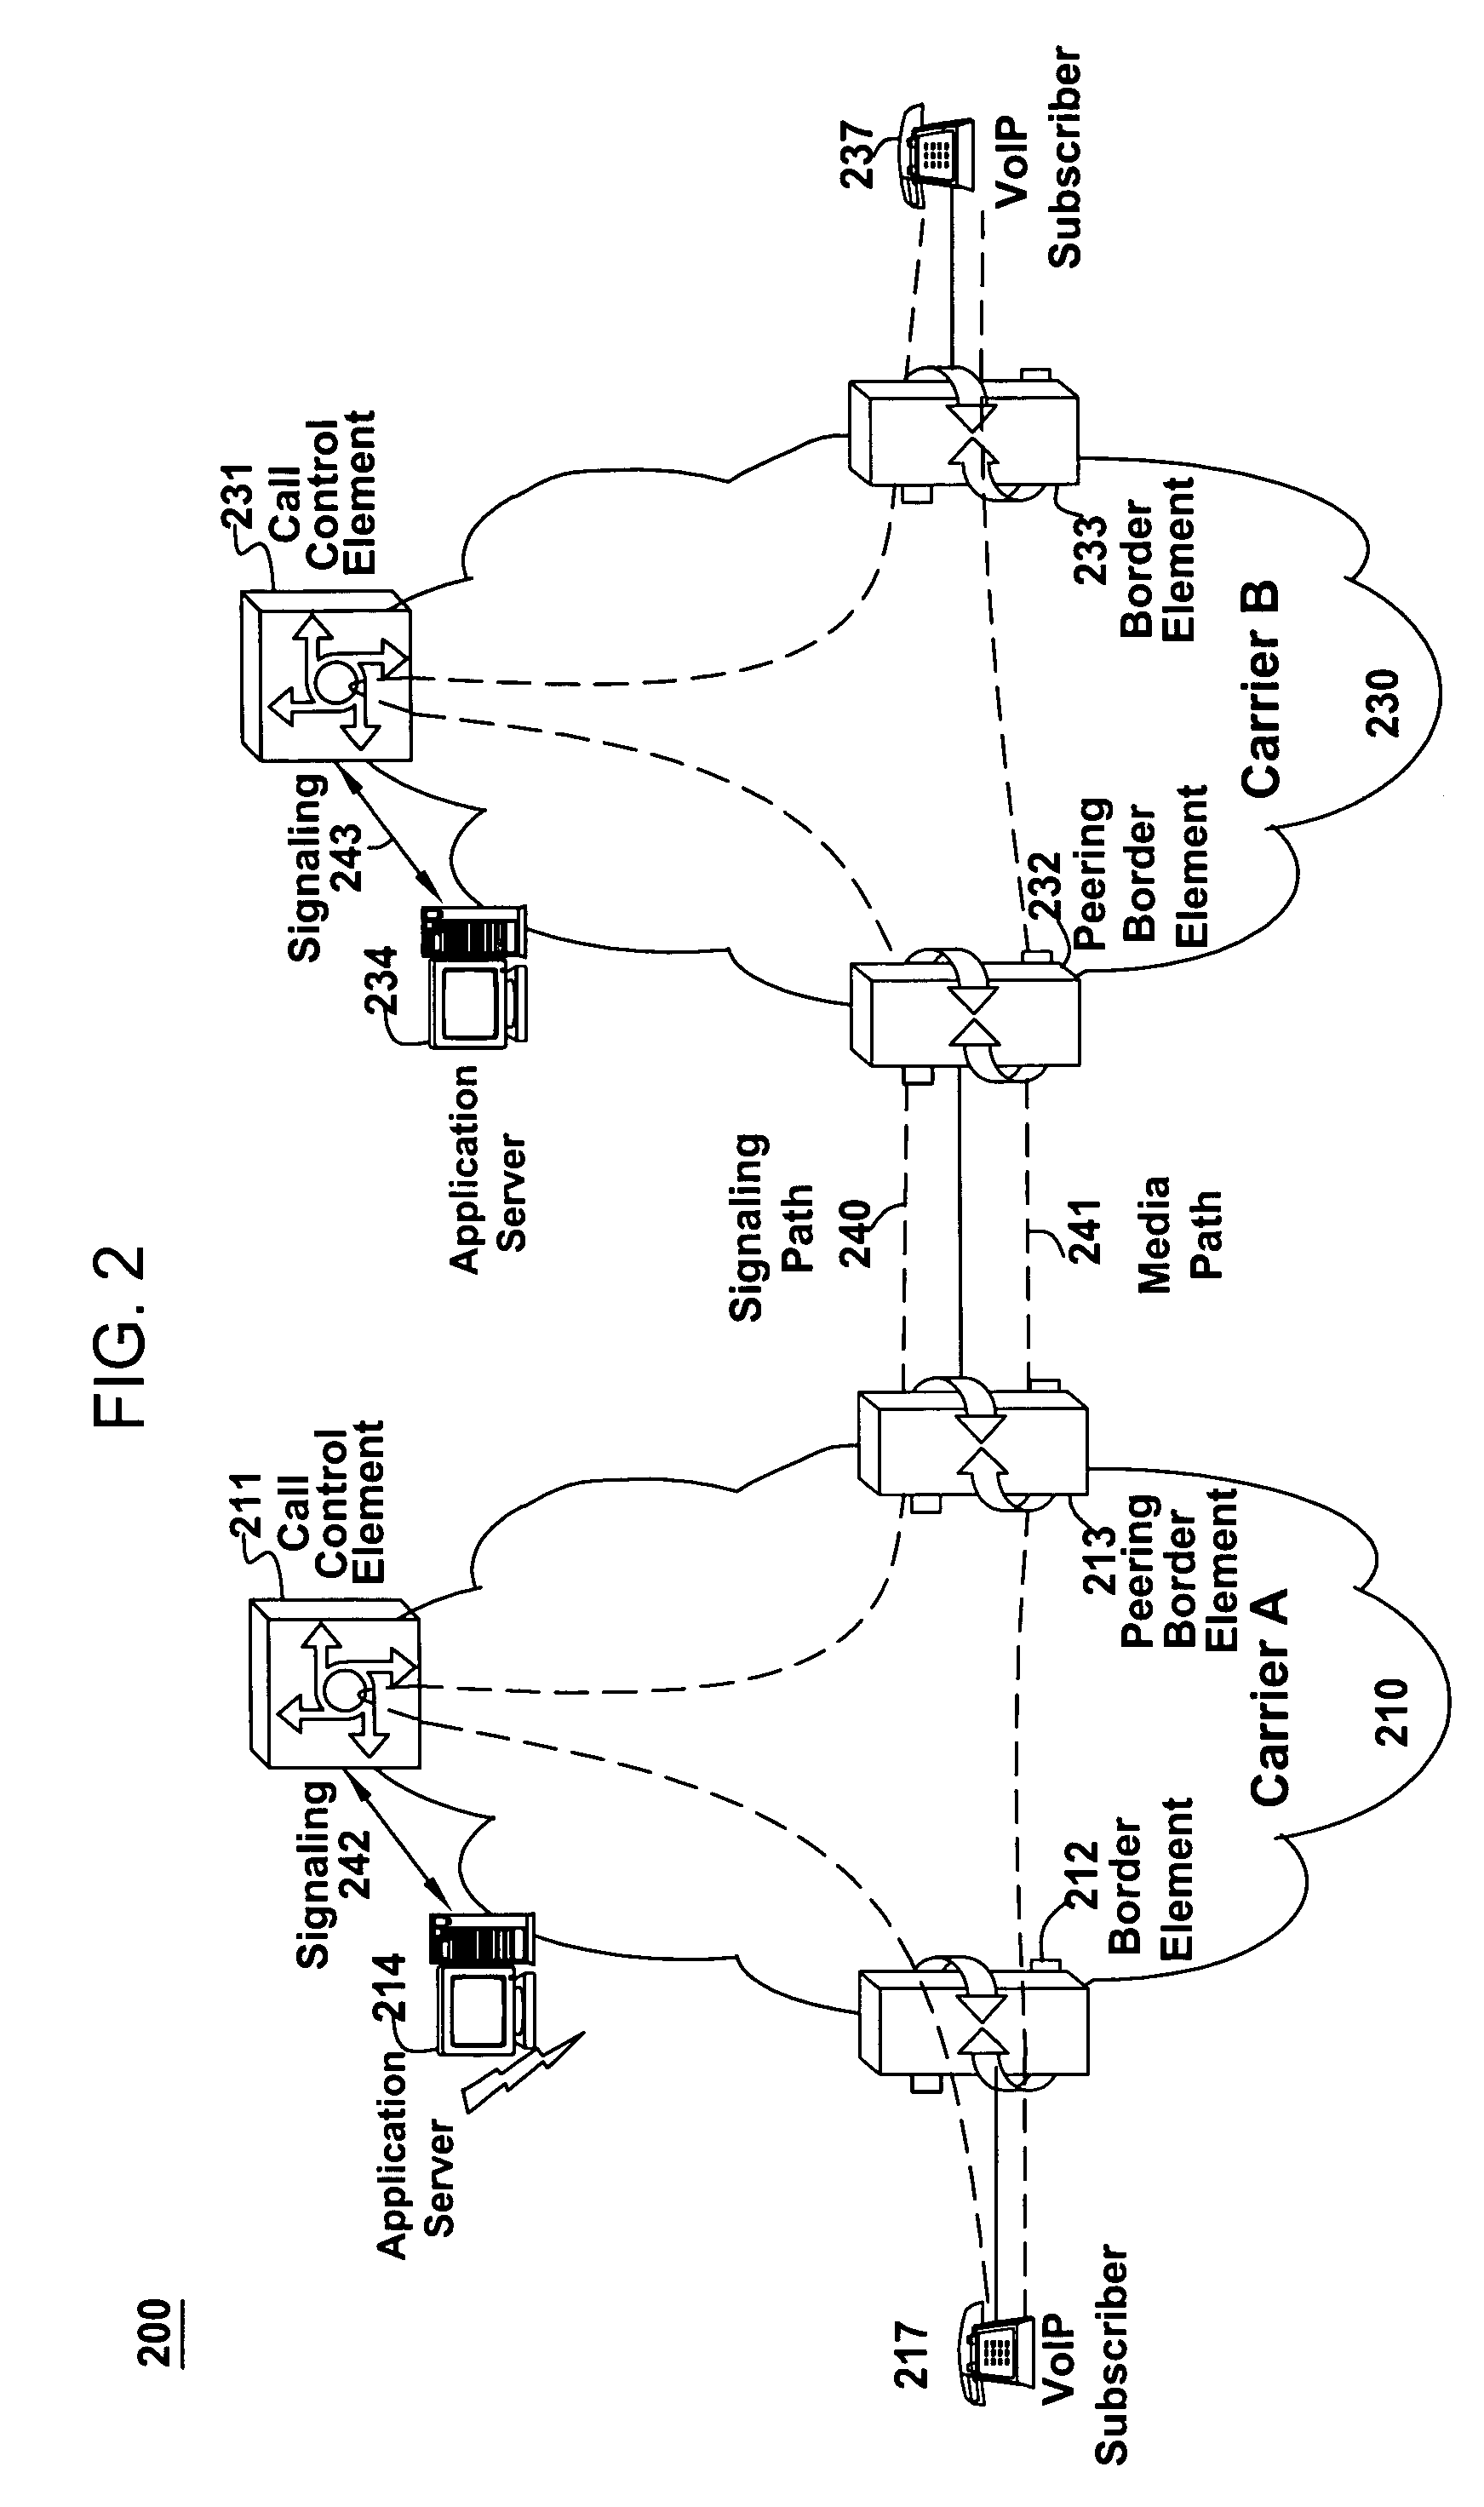 Method and apparatus for providing disaster recovery using network peering arrangements